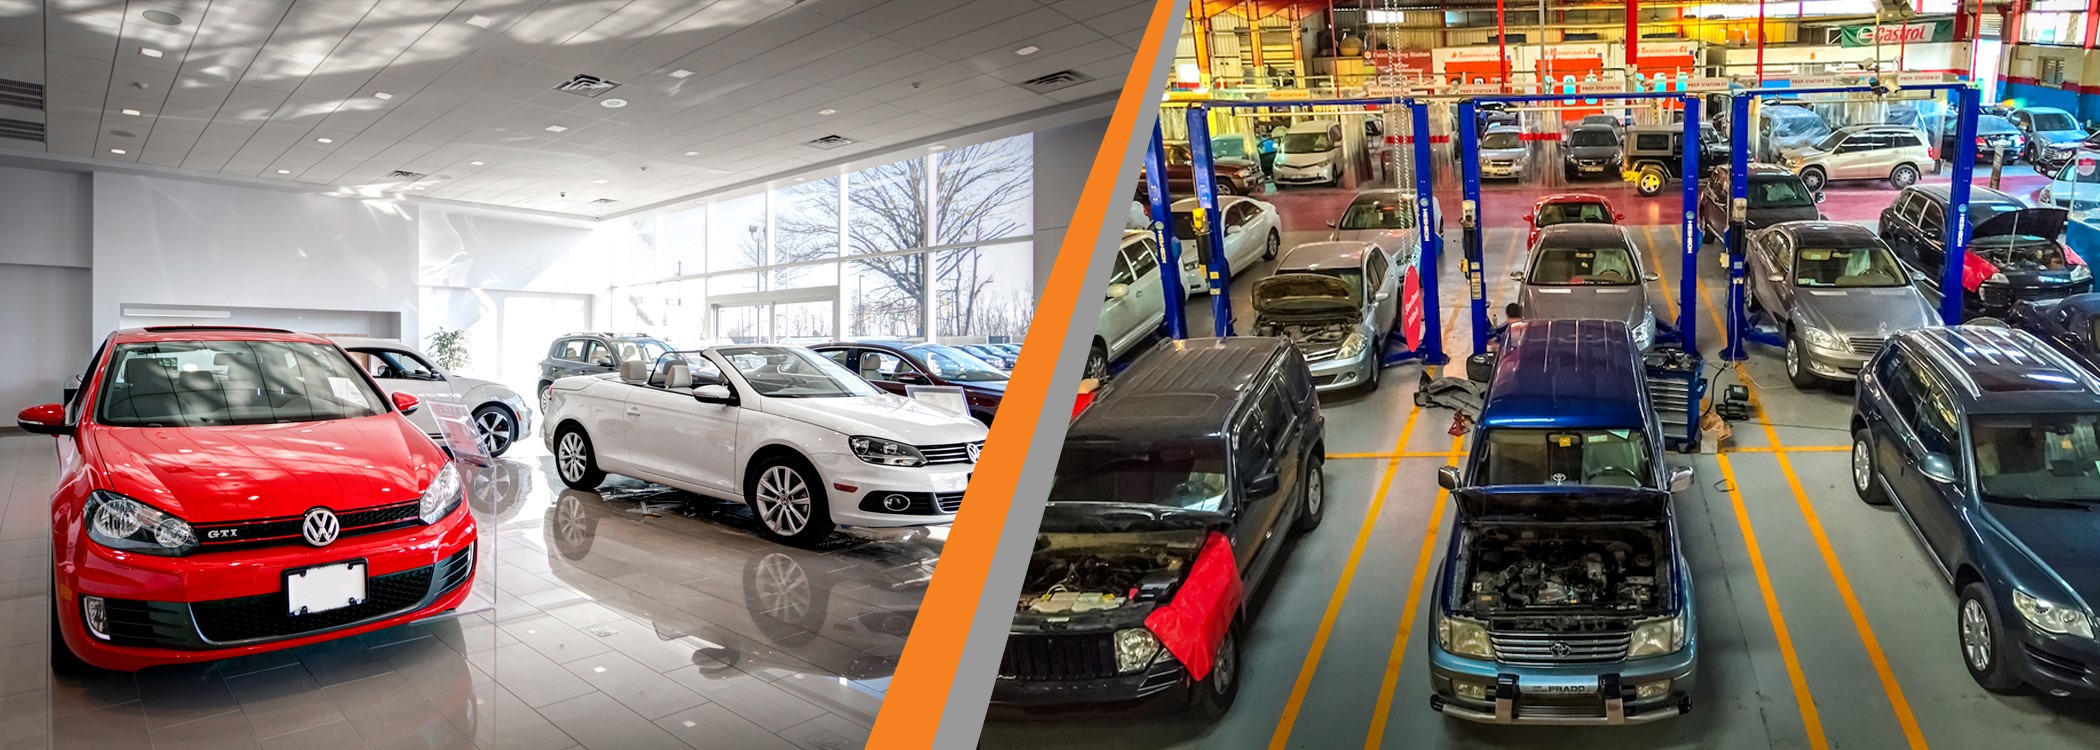 Upcoming Webinar: IR Heating & Air Curtain Design for Auto Dealerships and Service Garages